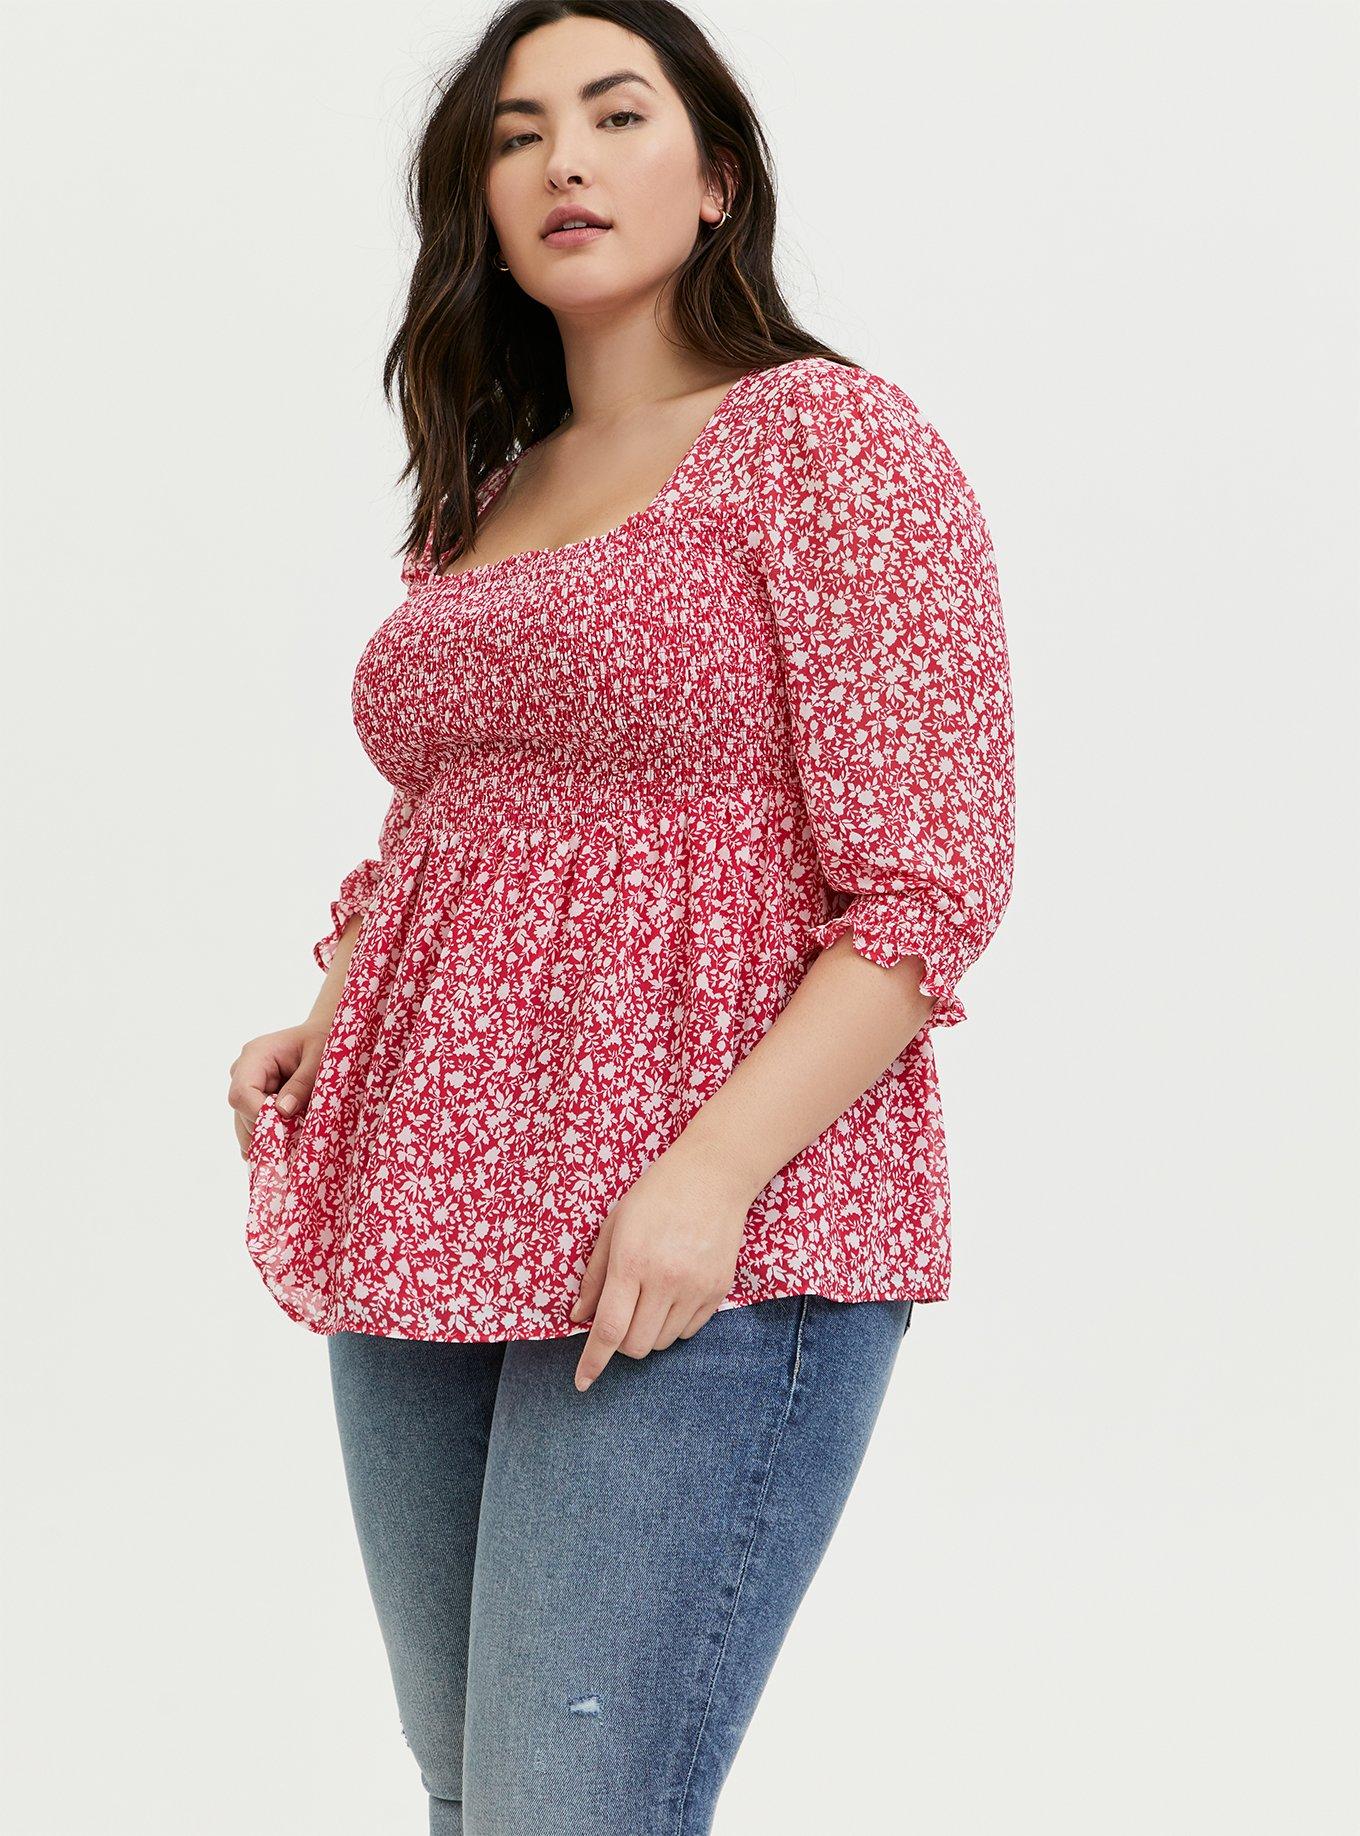 Torrid Women's Top Plus Size 2 RN# 148862 Pink Premium Tee Collection SEE  PHOTOS